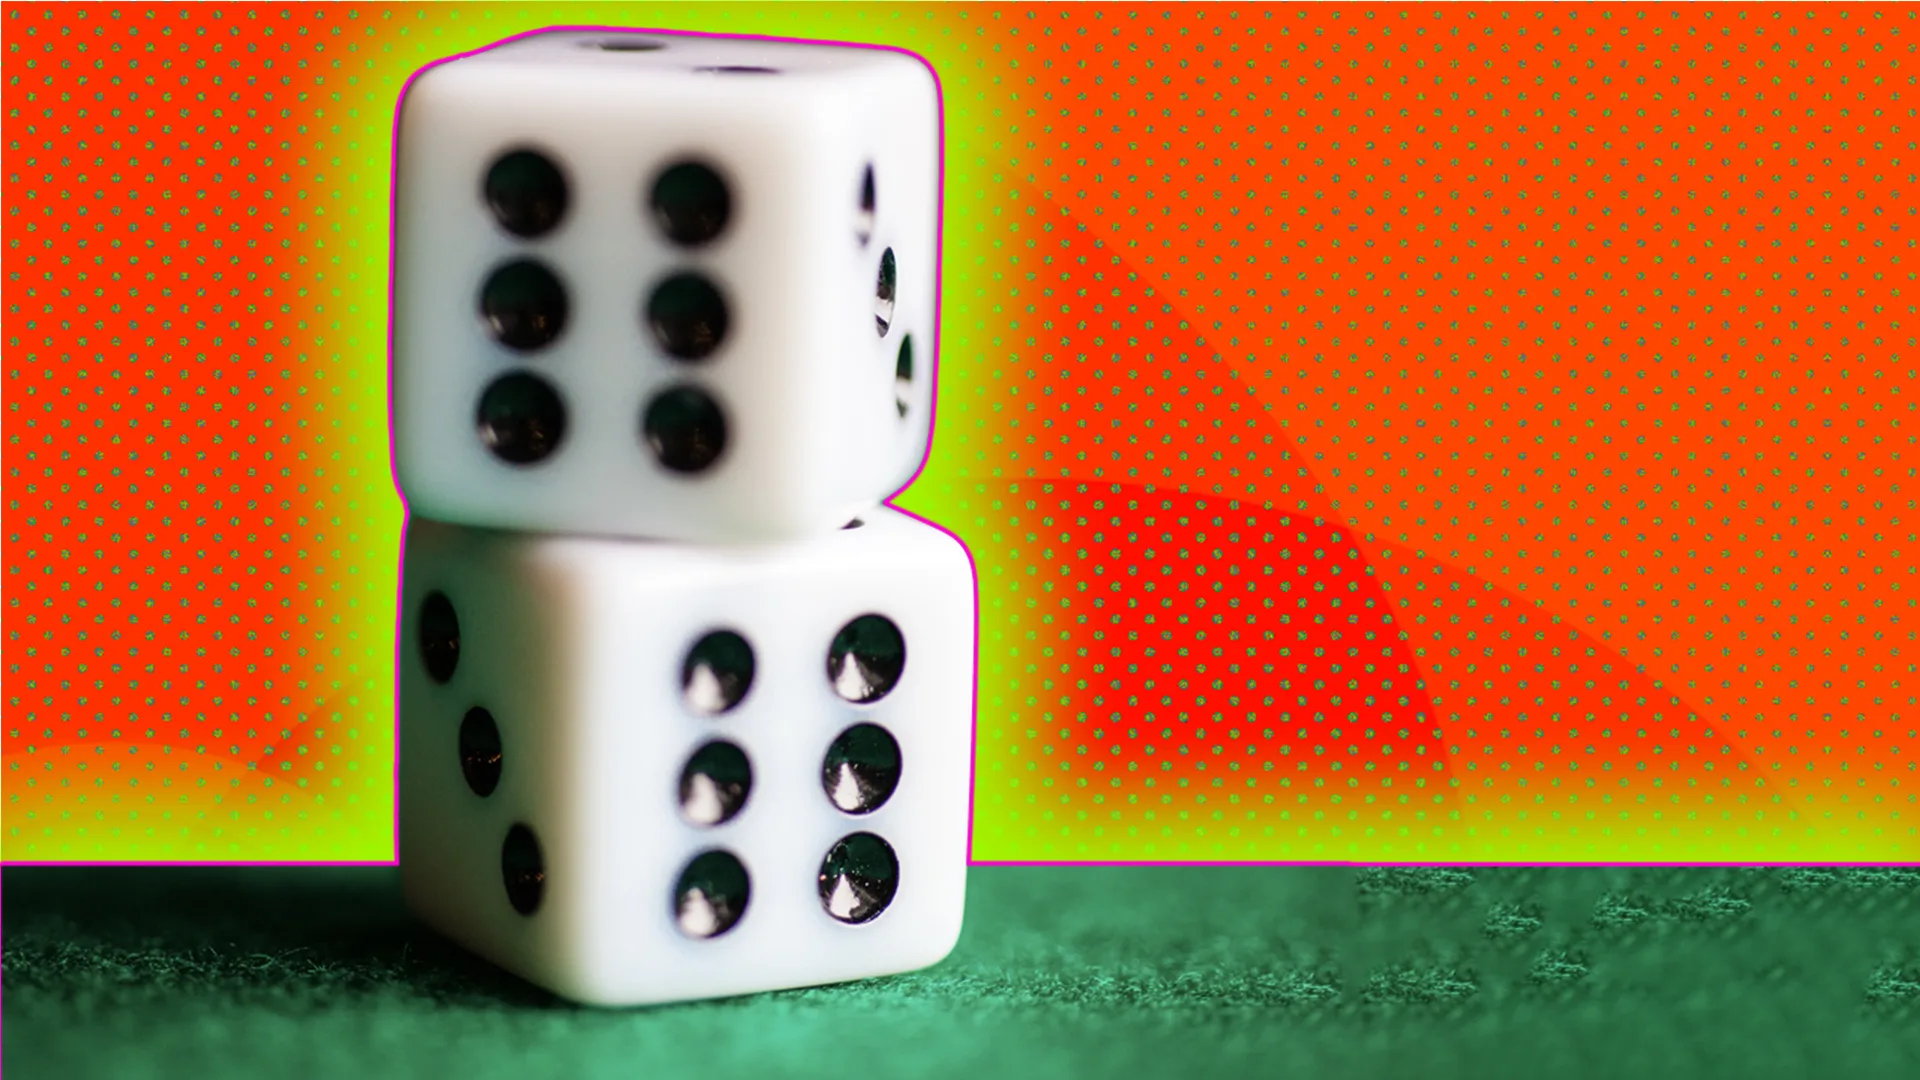 A pair of dice stacked on top of each other with a red textured background and outlined with a yellowy green halo effect